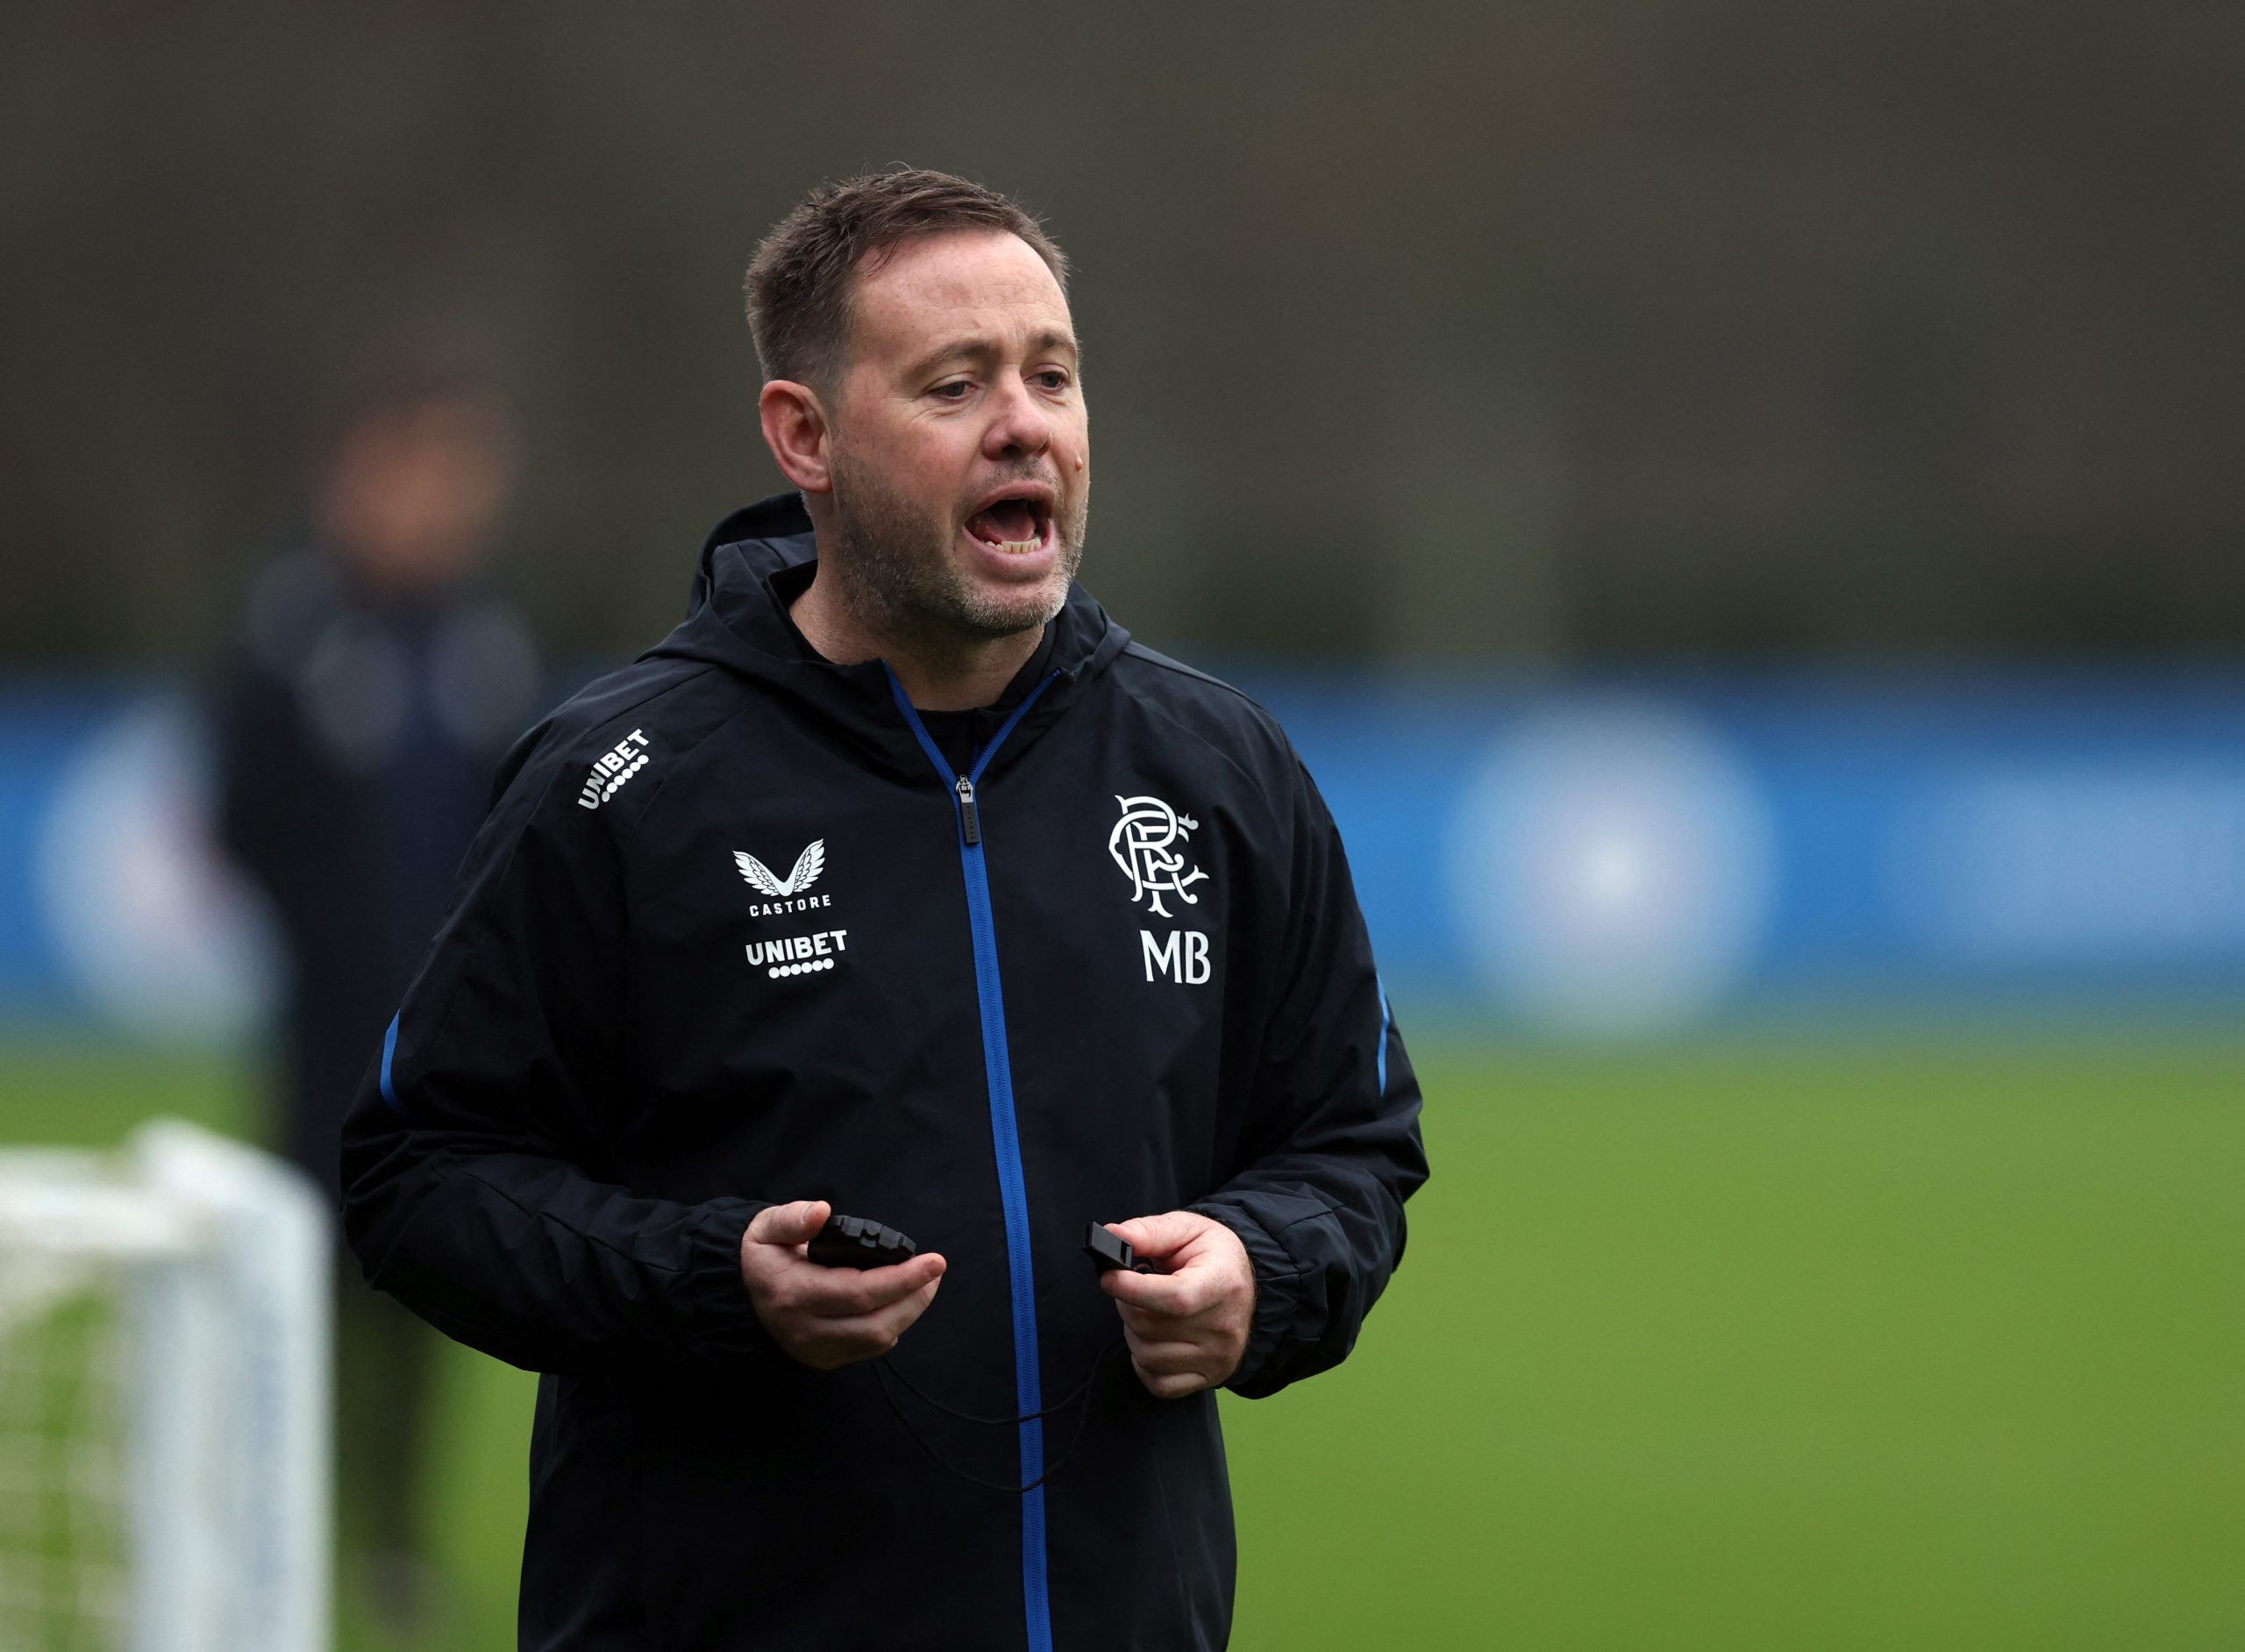 Soccer Football - Rangers Training with new manager Michael Beale - The Hummel Training Centre, Glasgow, Scotland, Britain - December 1, 2022 Newly appointed Rangers manager Michael Beale during training REUTERS/Russell Cheyne